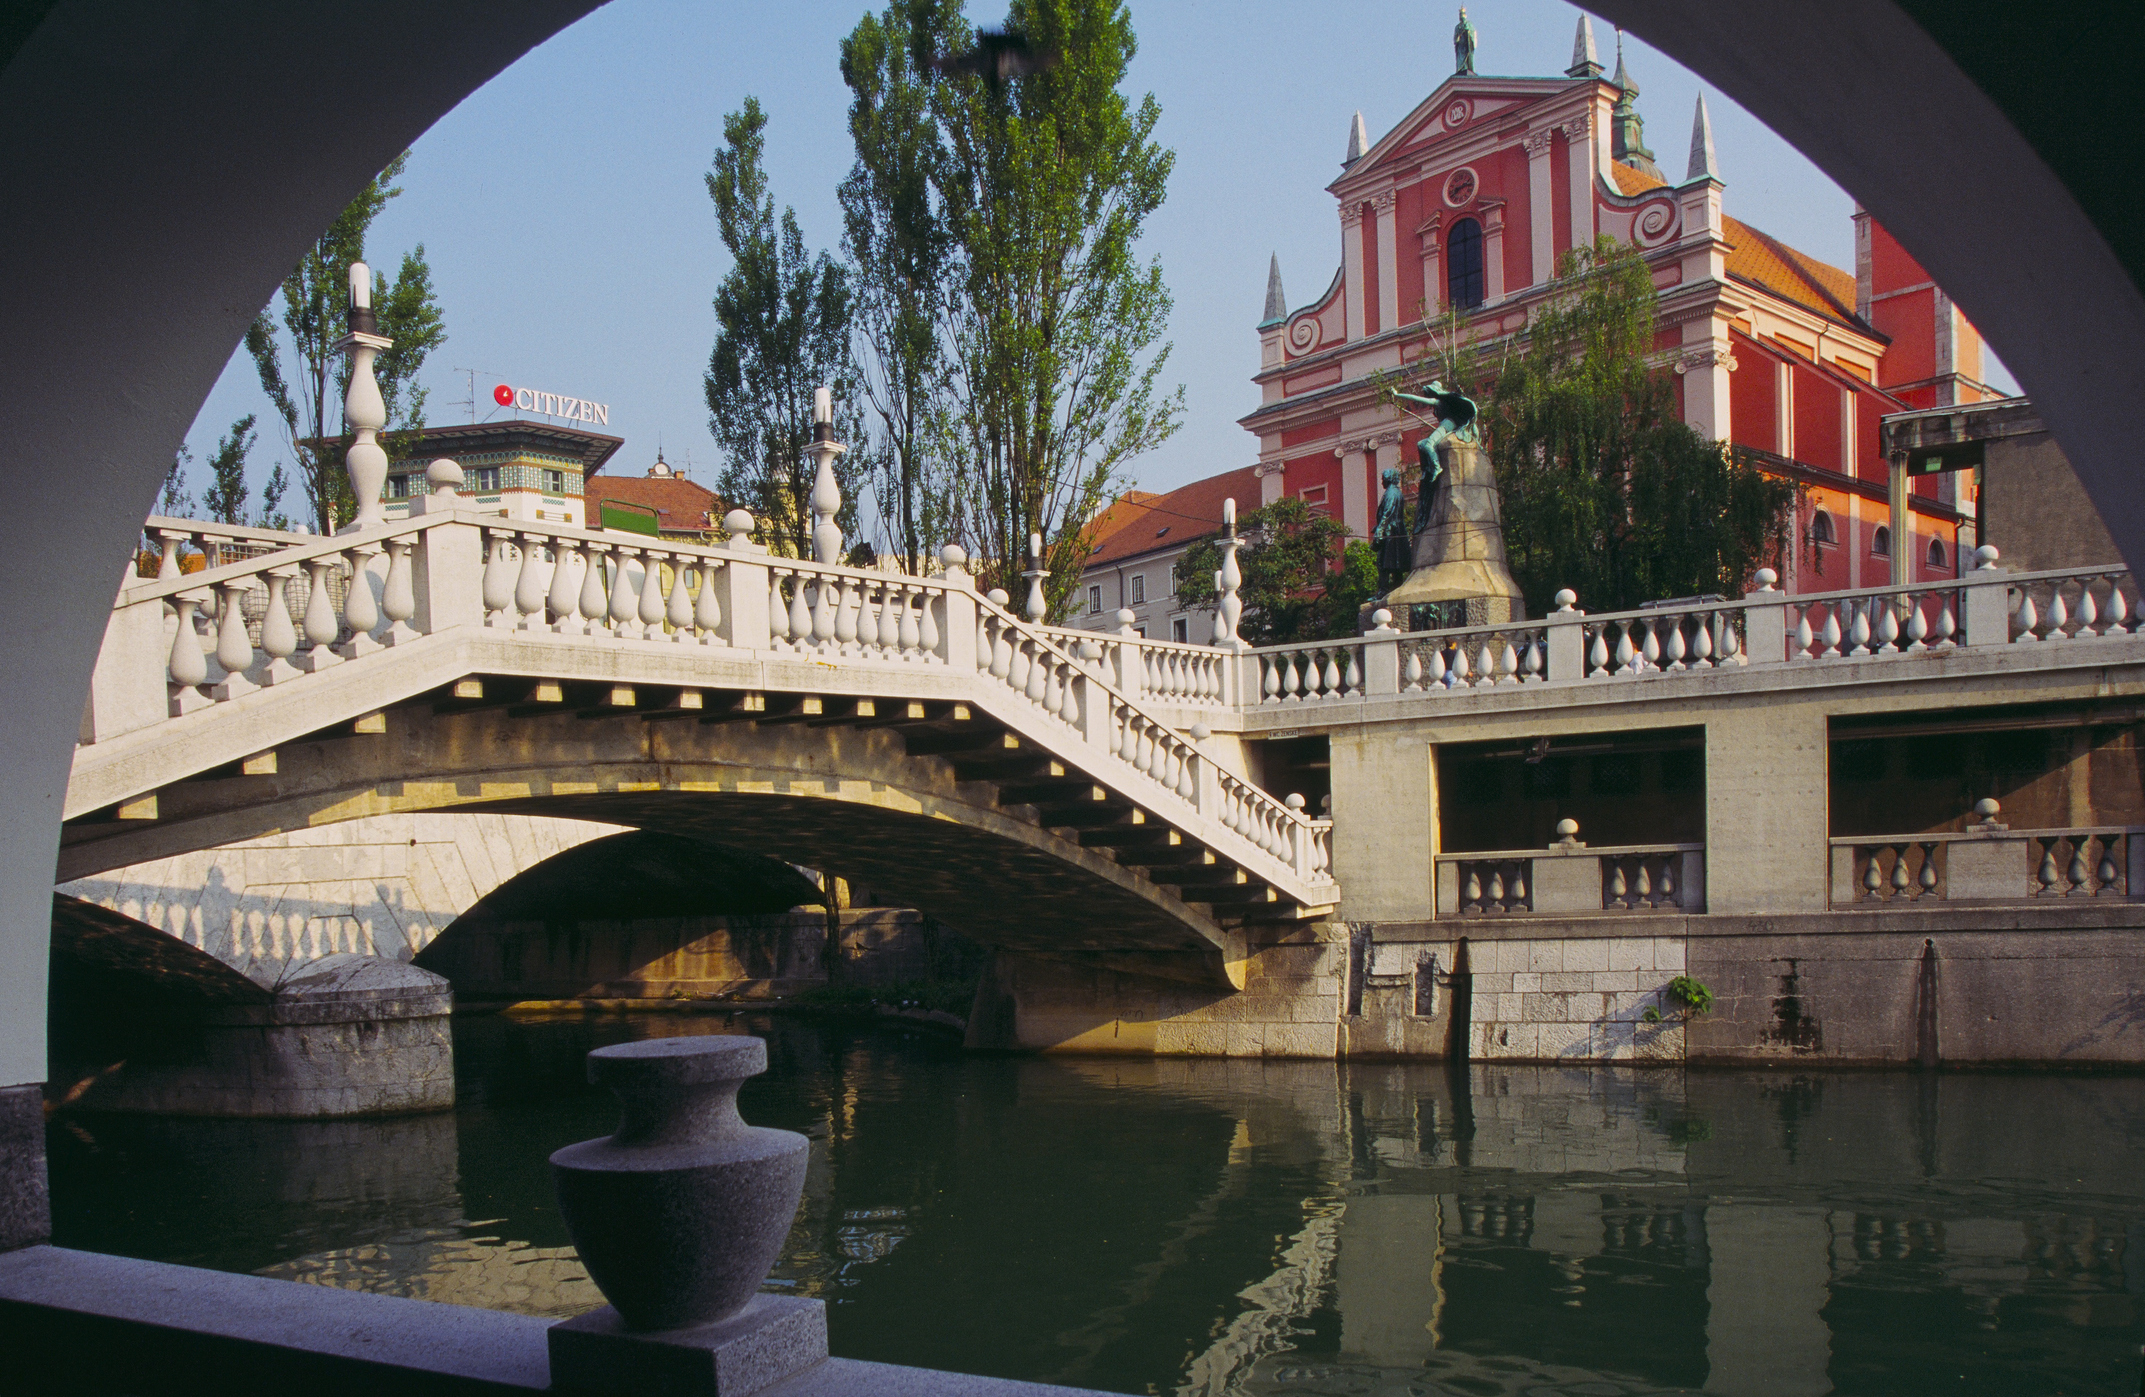 View of a historic bridge and church from under an archway, in a scenic European city